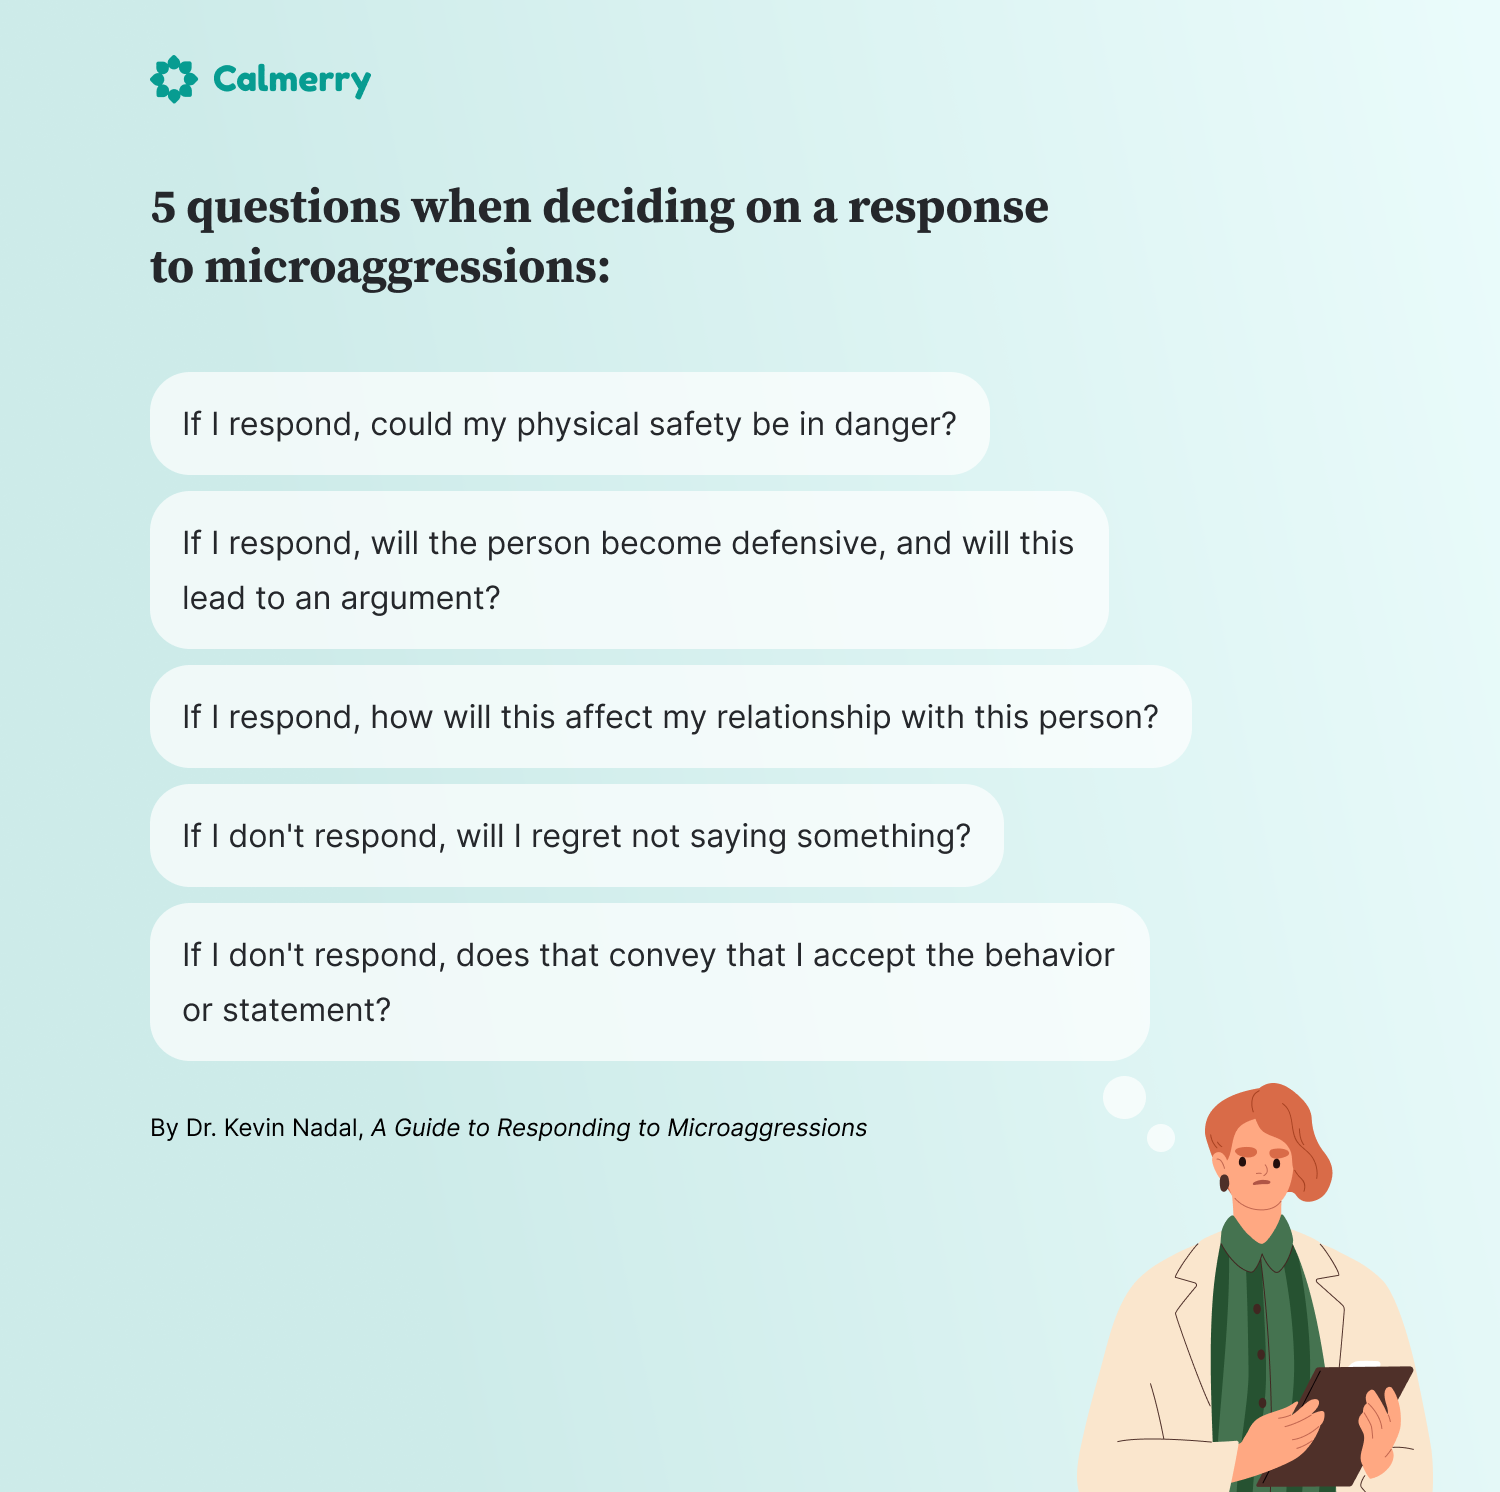 5 questions when deciding on a response to microaggressions

If I respond, could my physical safety be in danger?
If I respond, will the person become defensive, and will this lead to an argument?
If I respond, how will this affect my relationship with this person?
If I don't respond, will I regret not saying something?
If I don't respond, does that convey that I accept the behavior or statement?